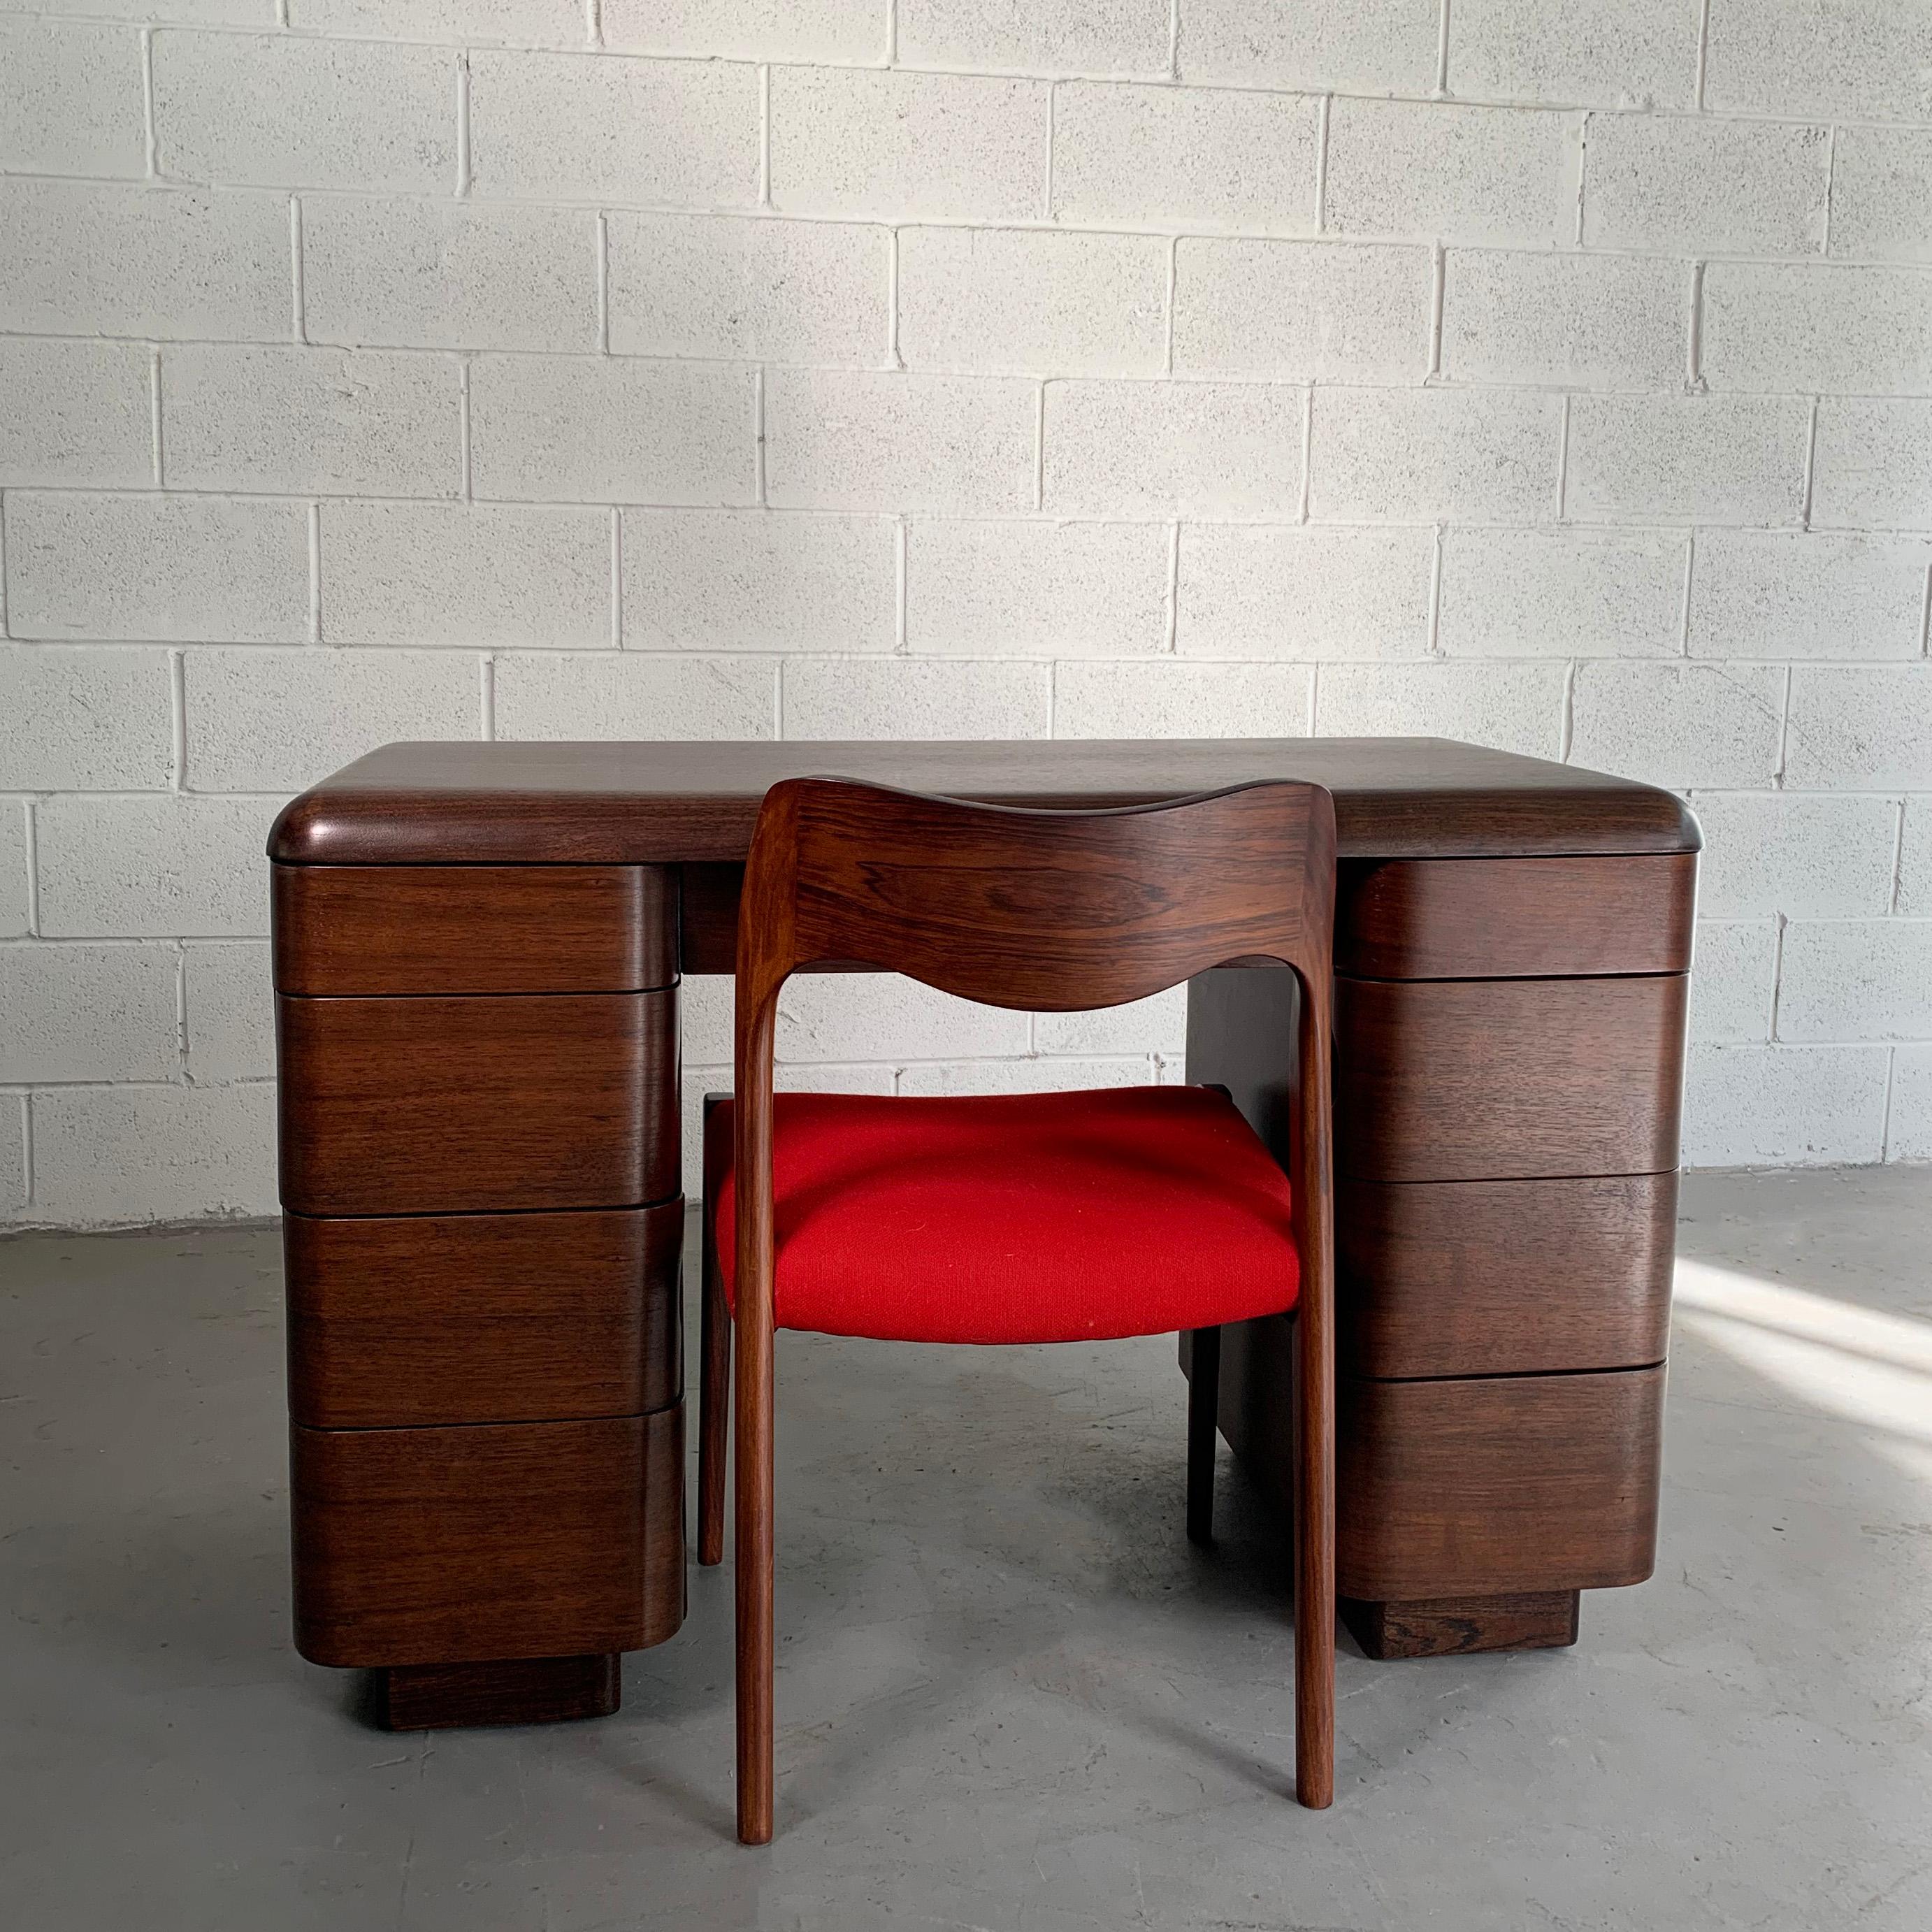 American Bentwood Desk by Paul Goldman for Plymodern